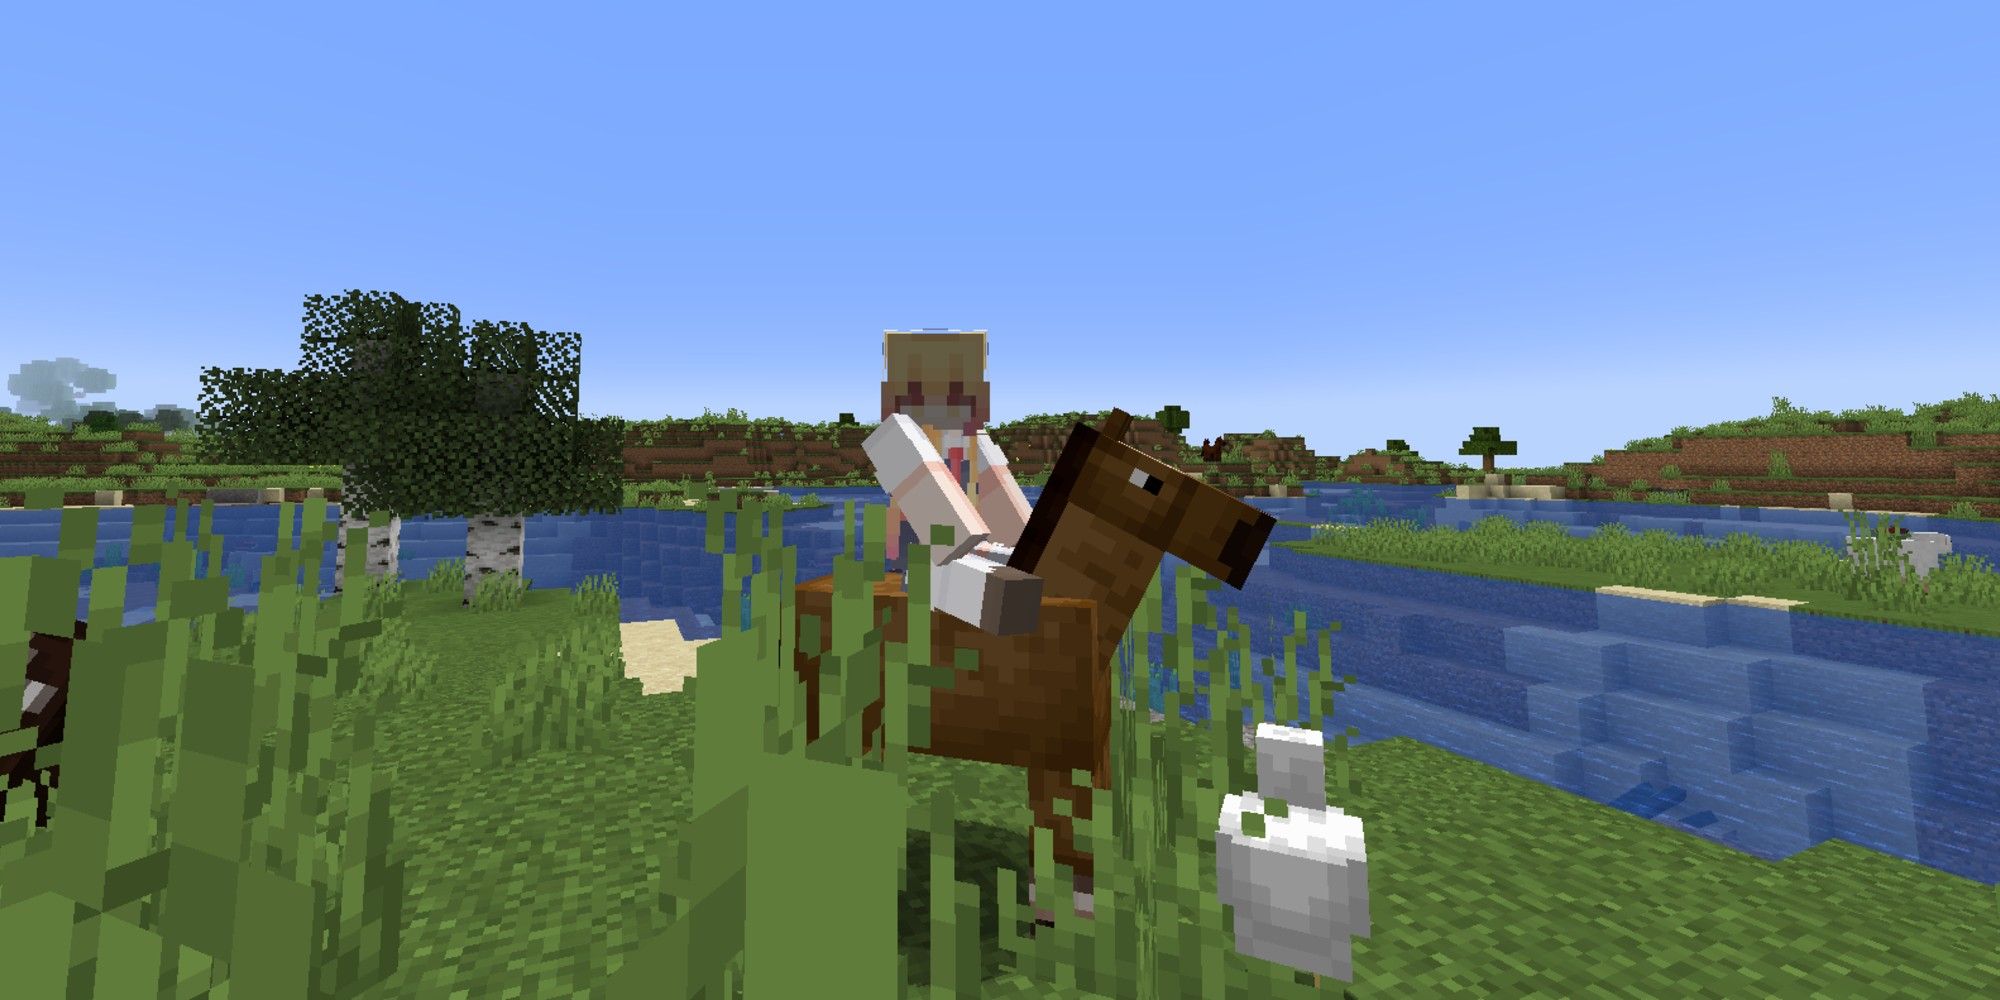 player sitting on horse